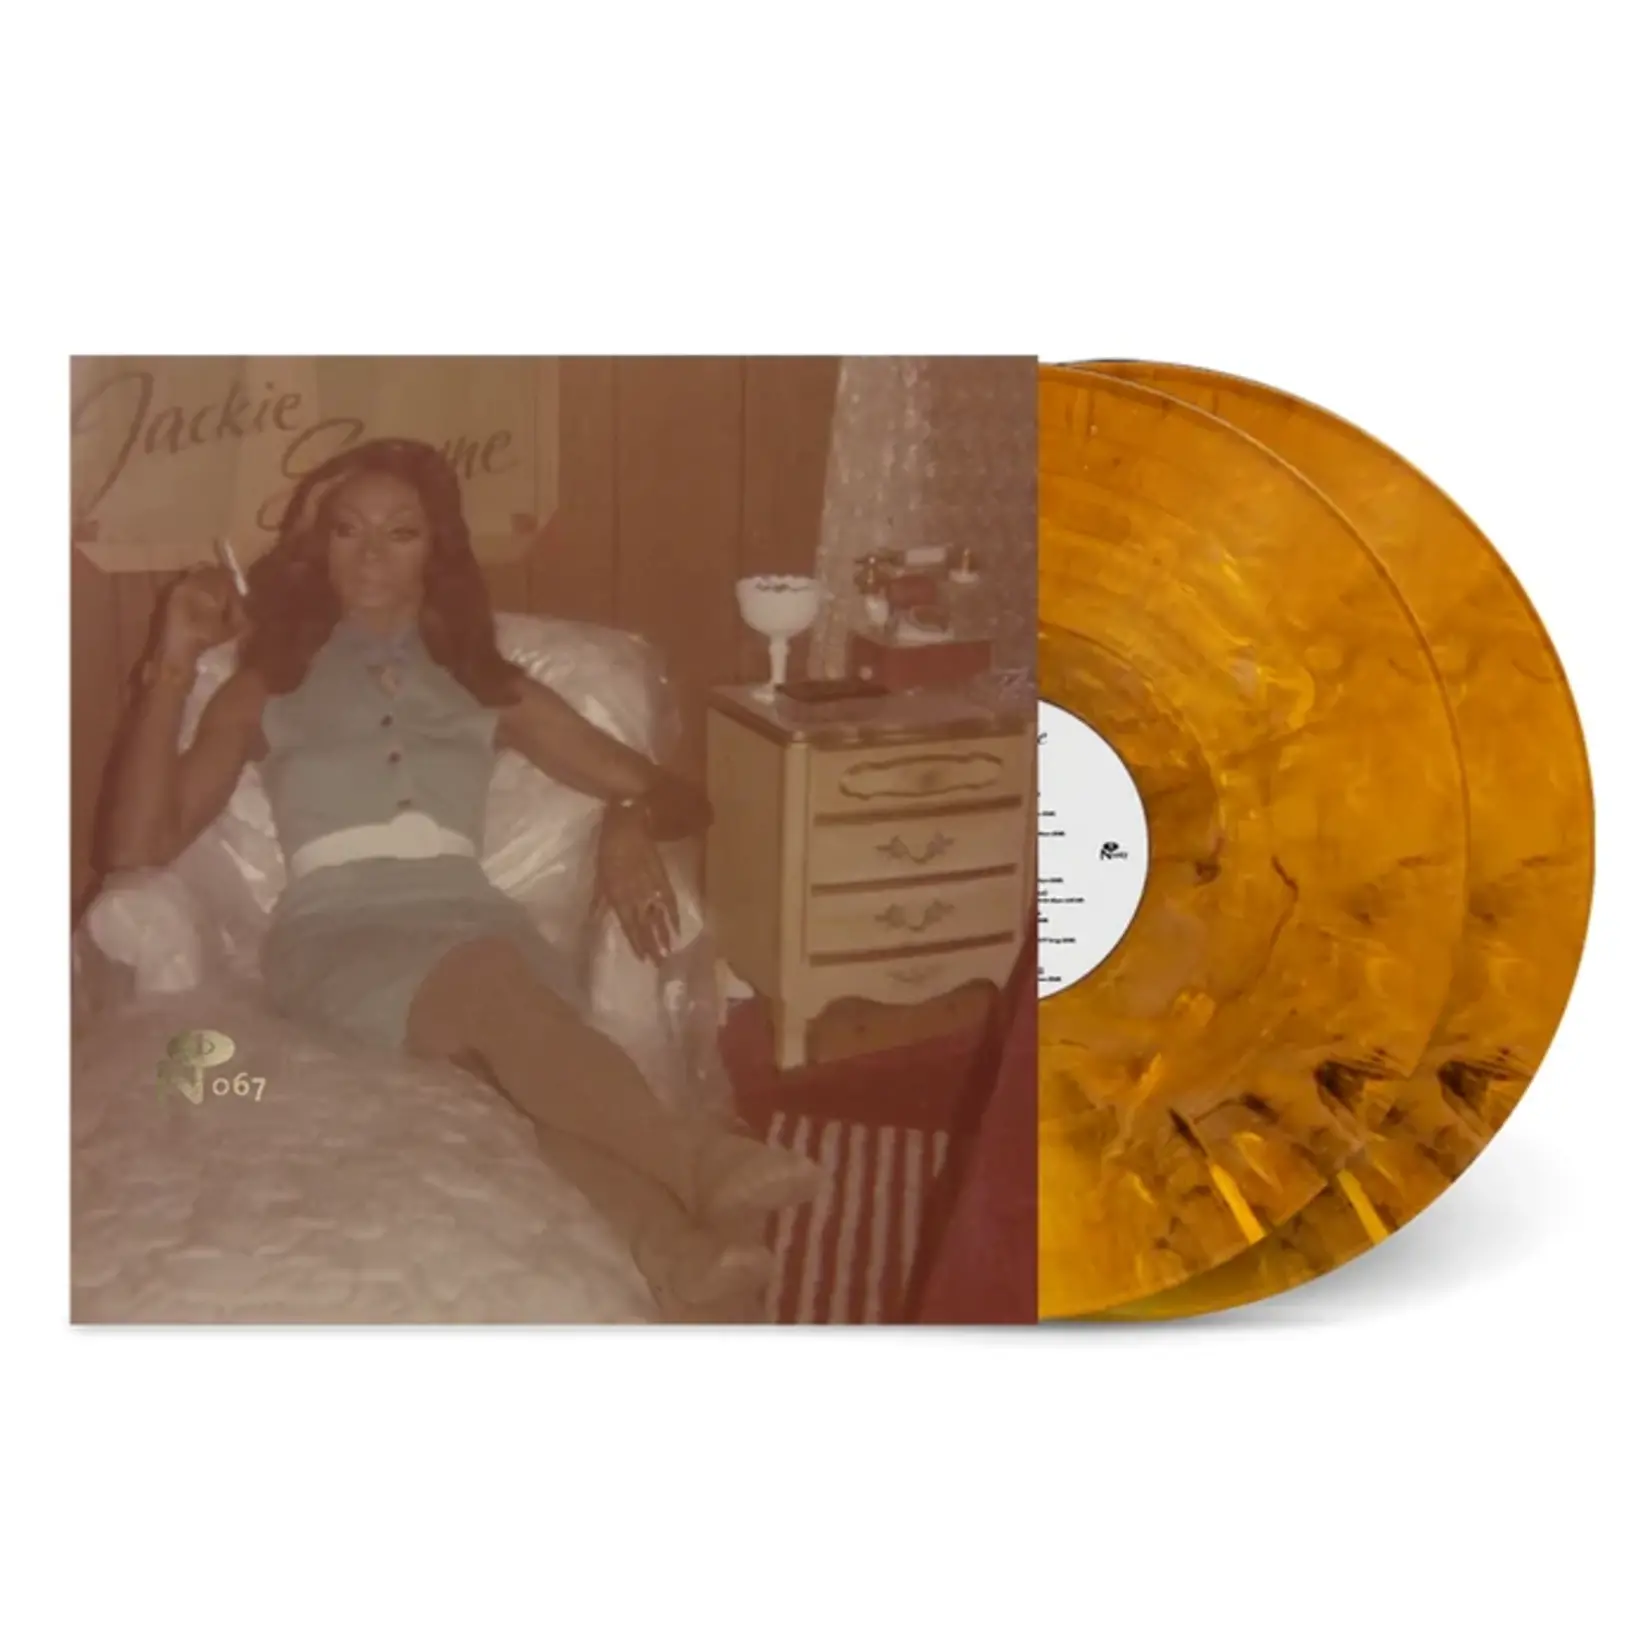 [New] Jackie Shane - Any Other Way (2LP, gold & black vinyl)